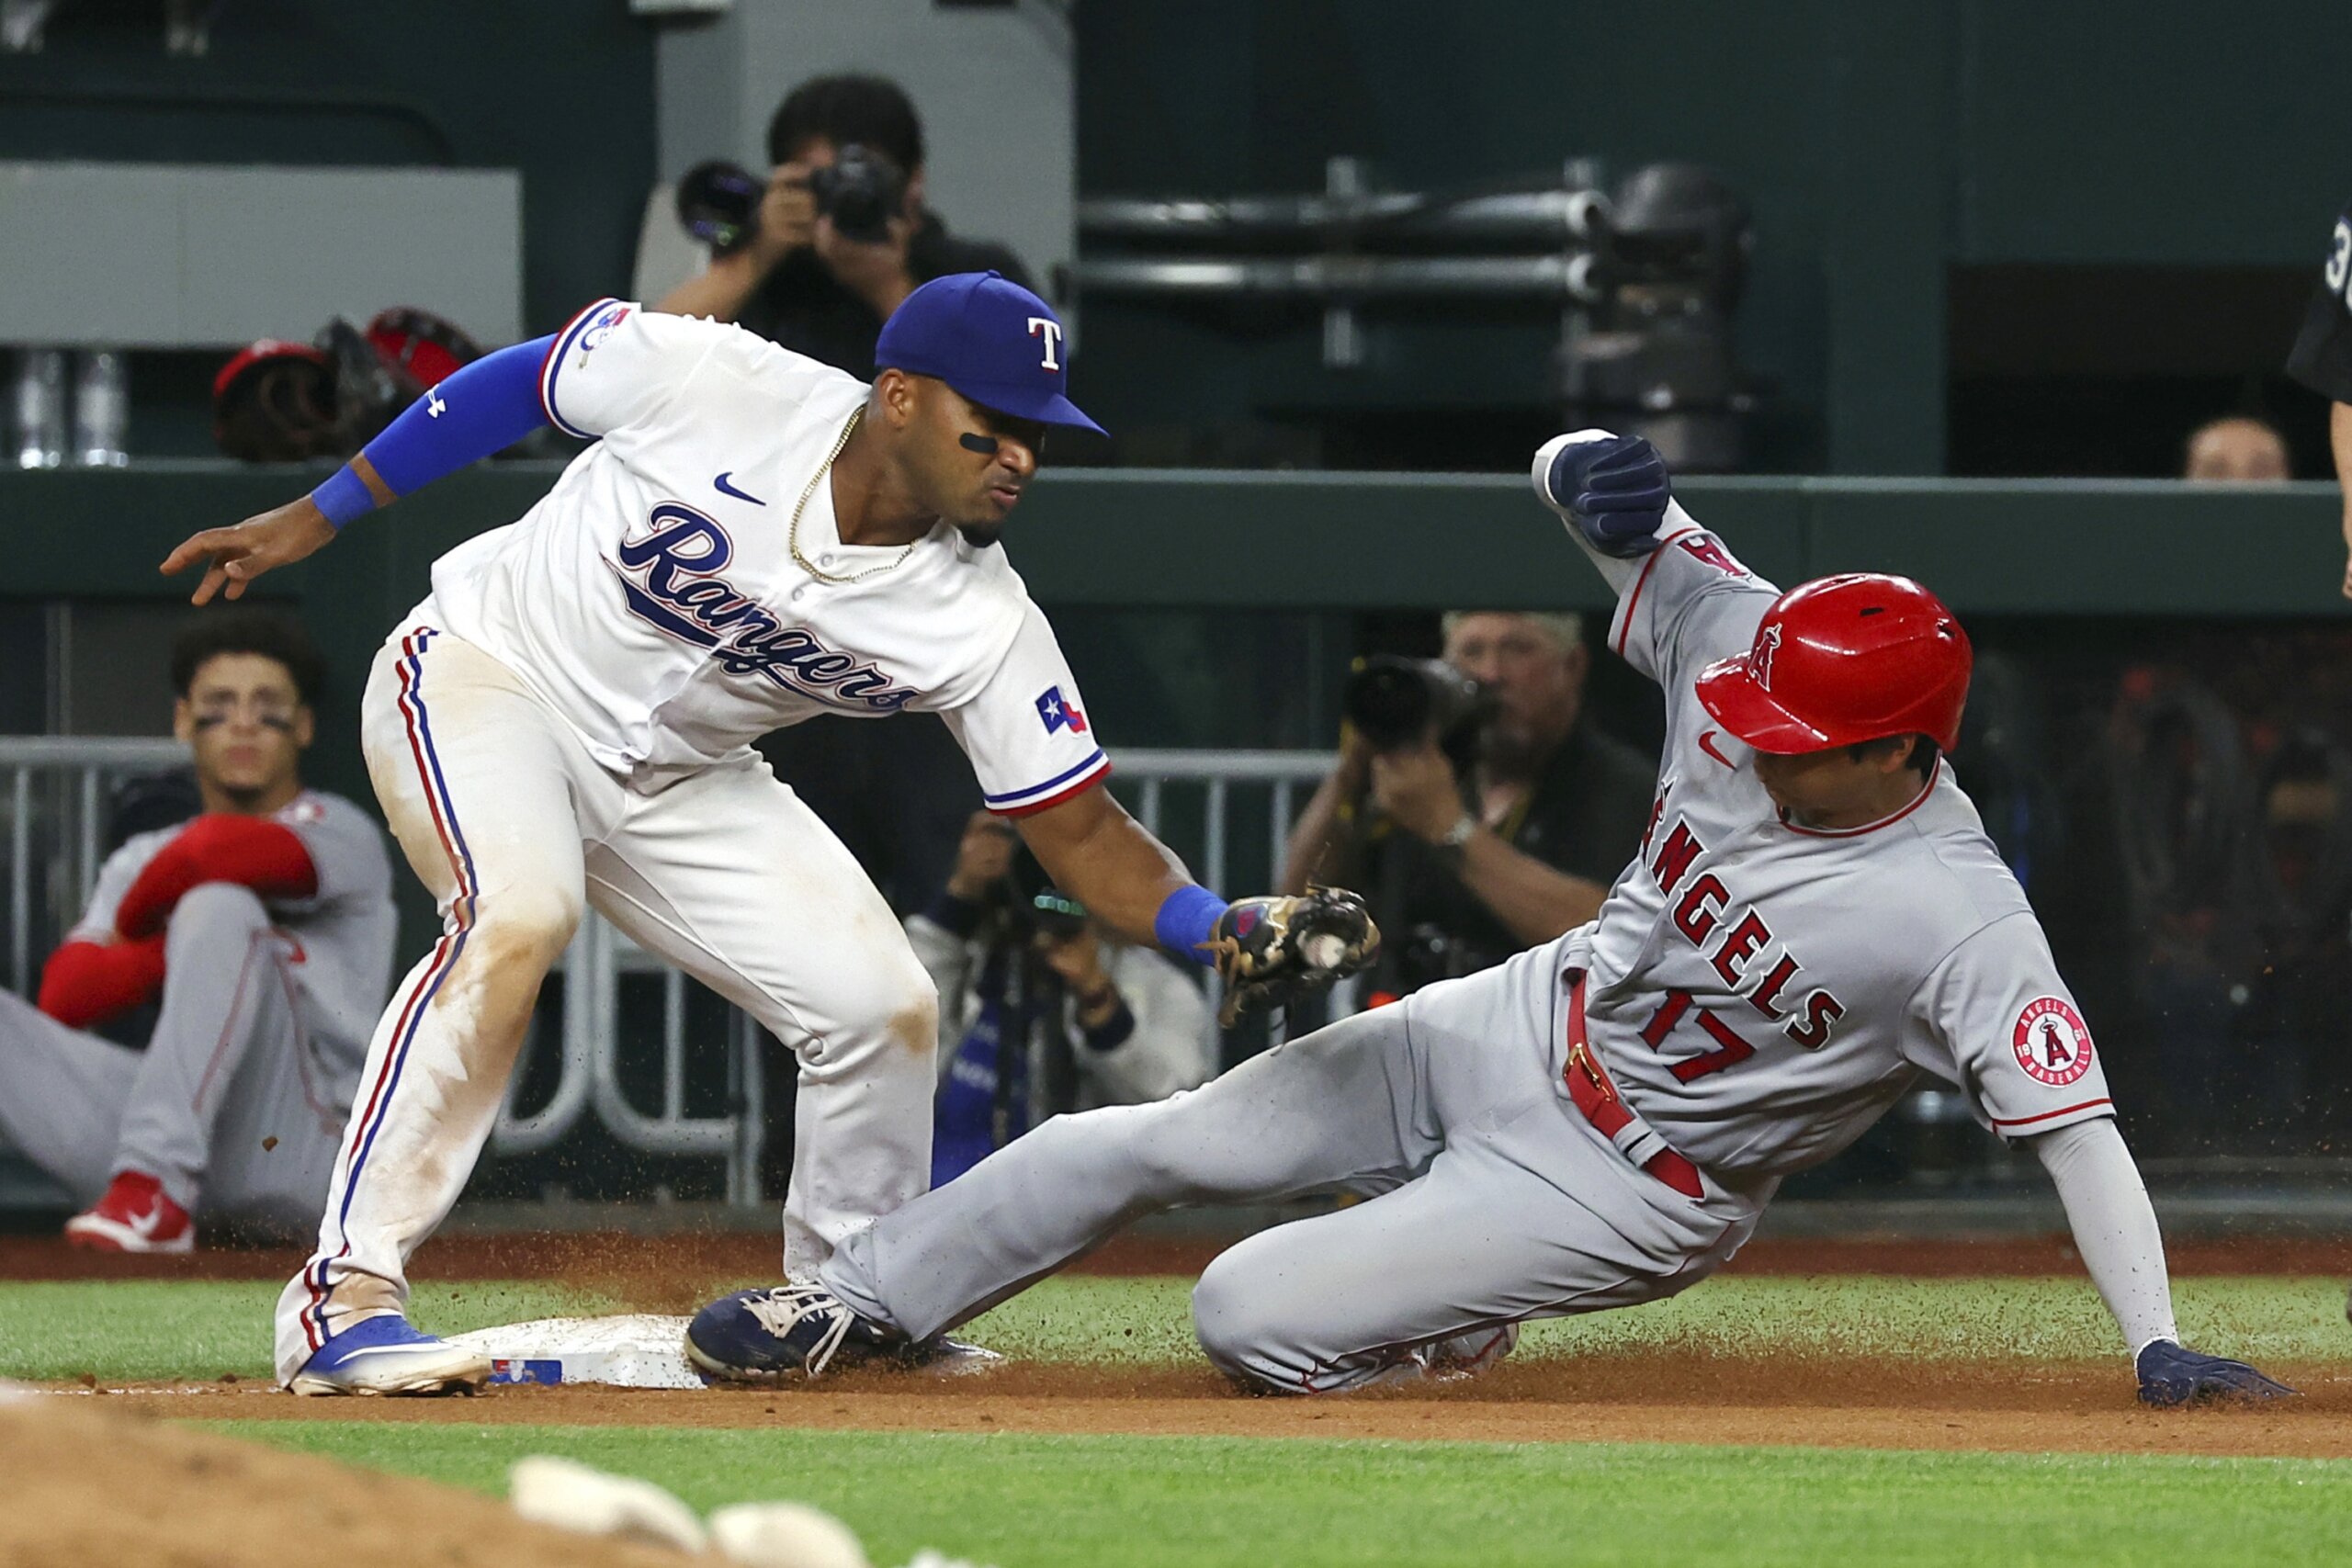 Home Runs by Trout, Walsh Power Angels Past Rangers 6-2